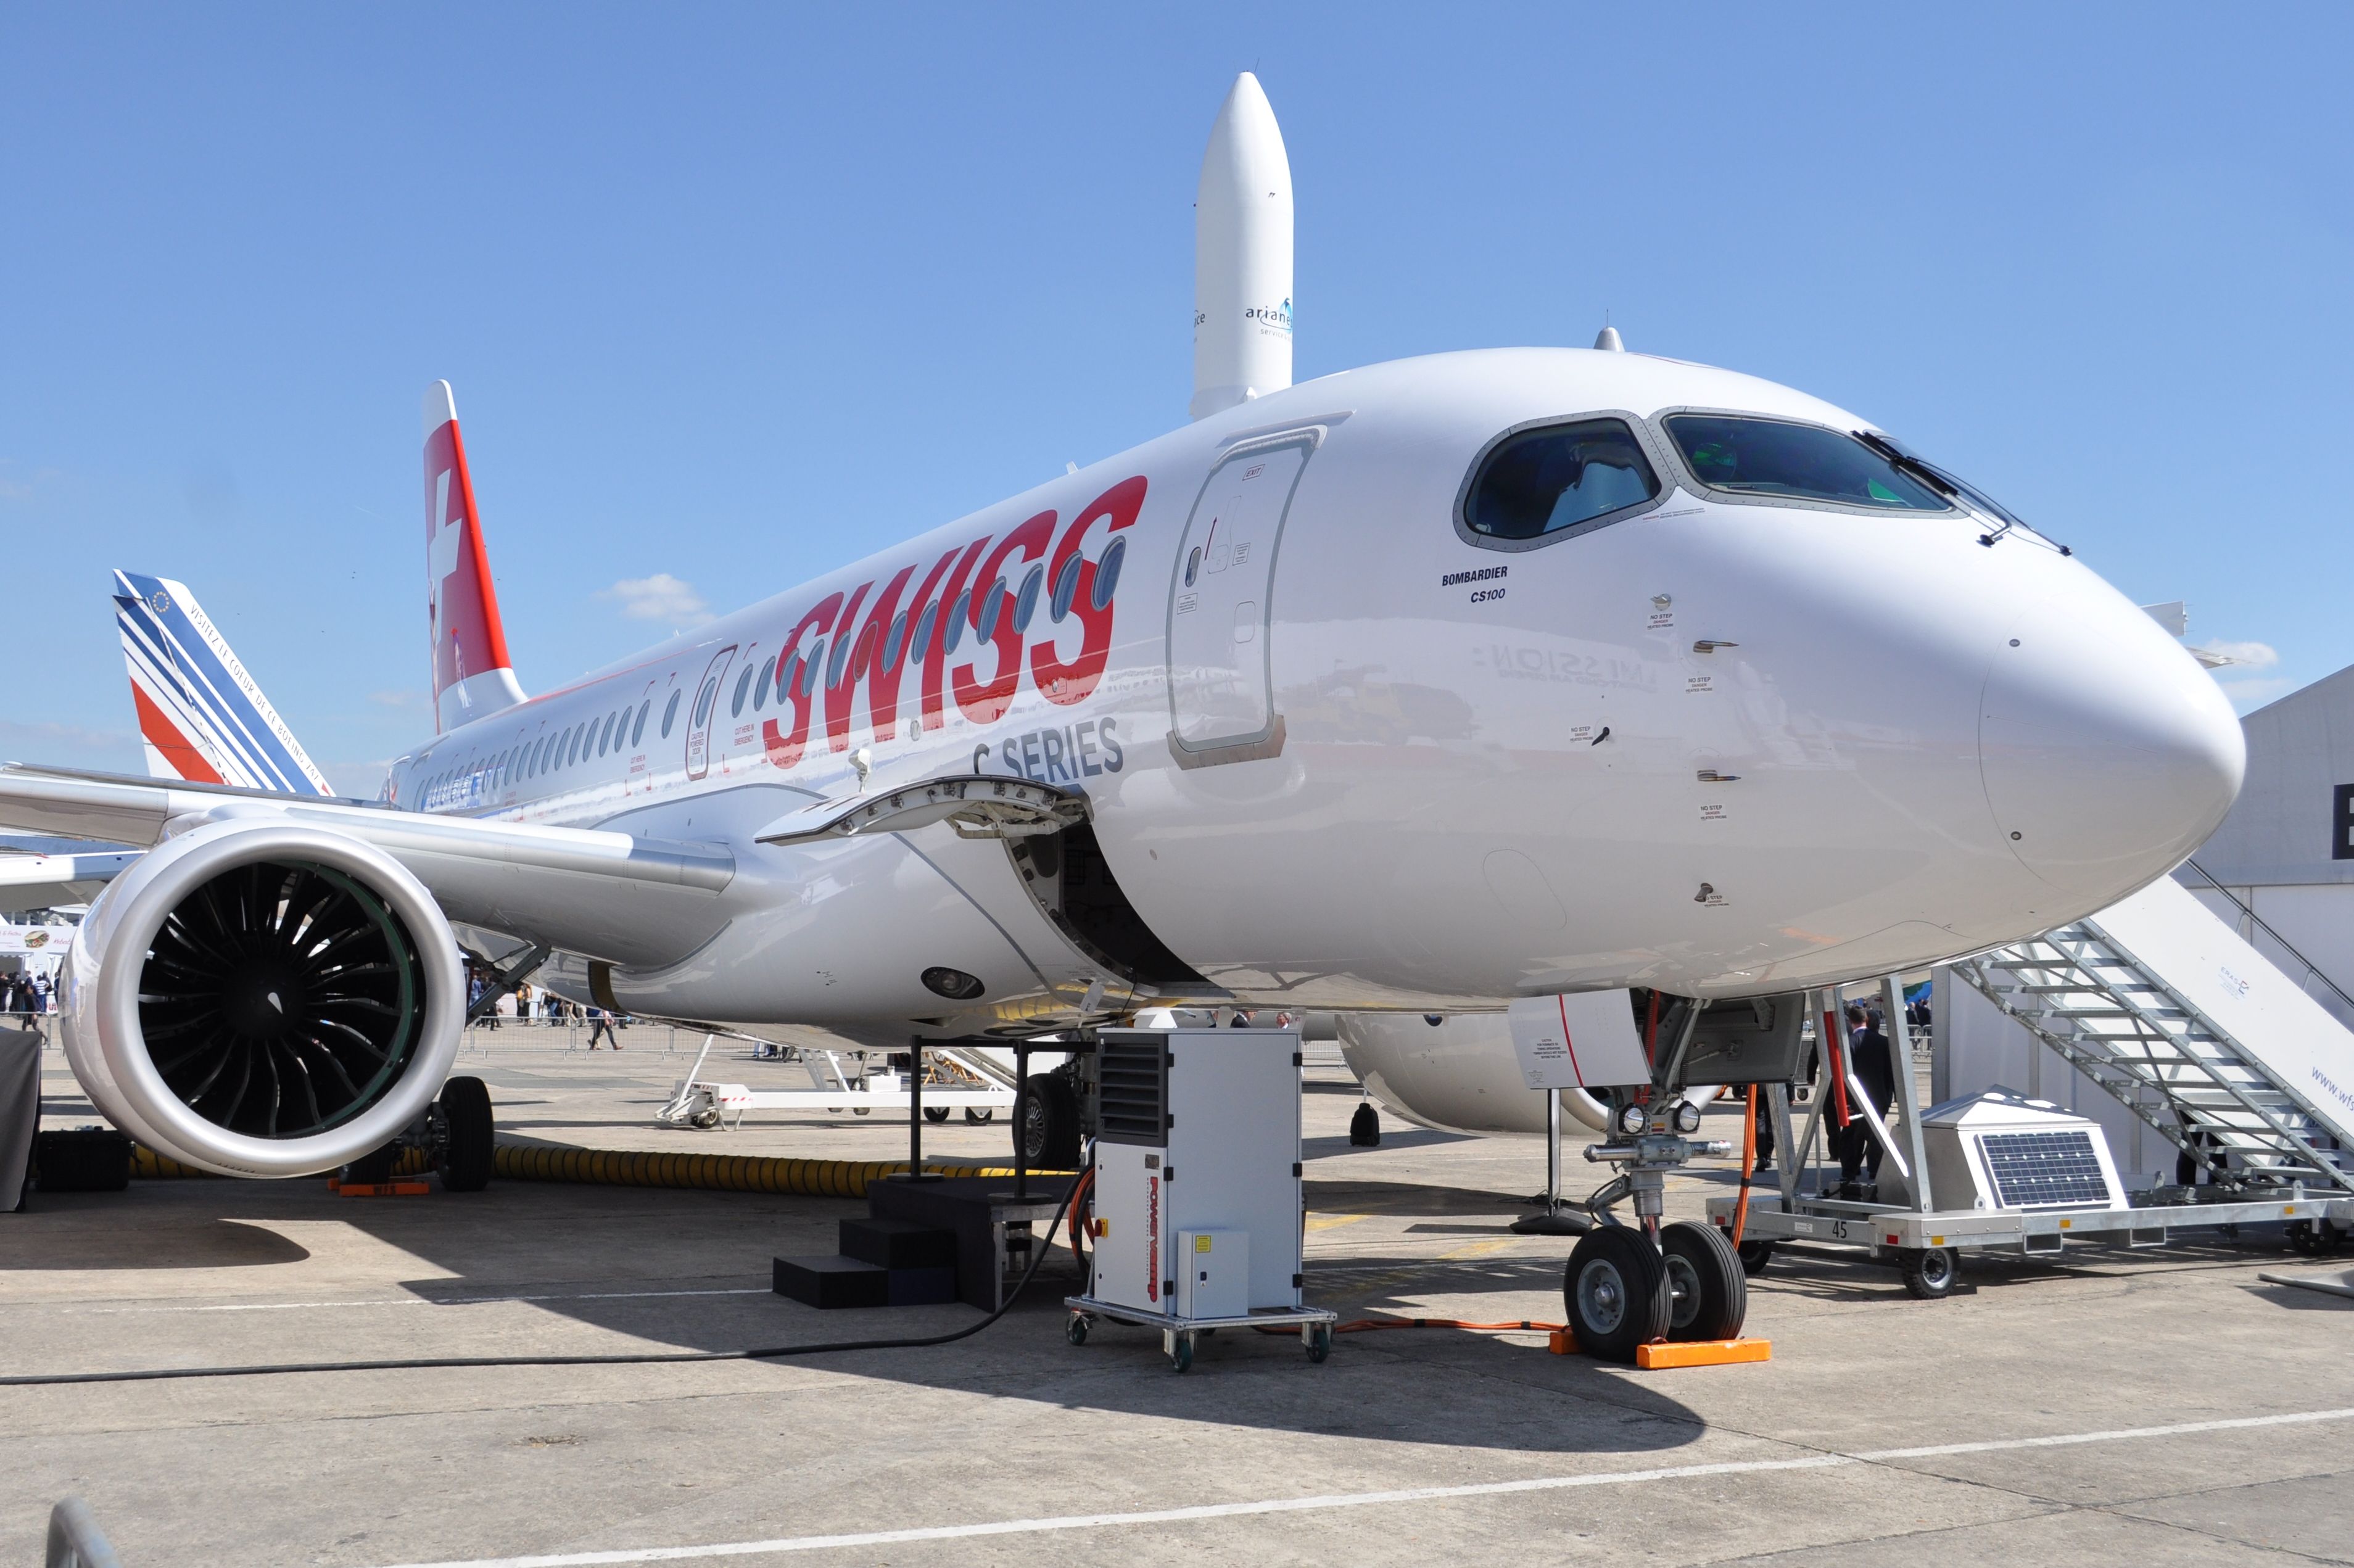 A SWISS CS100 on display at an airshow.